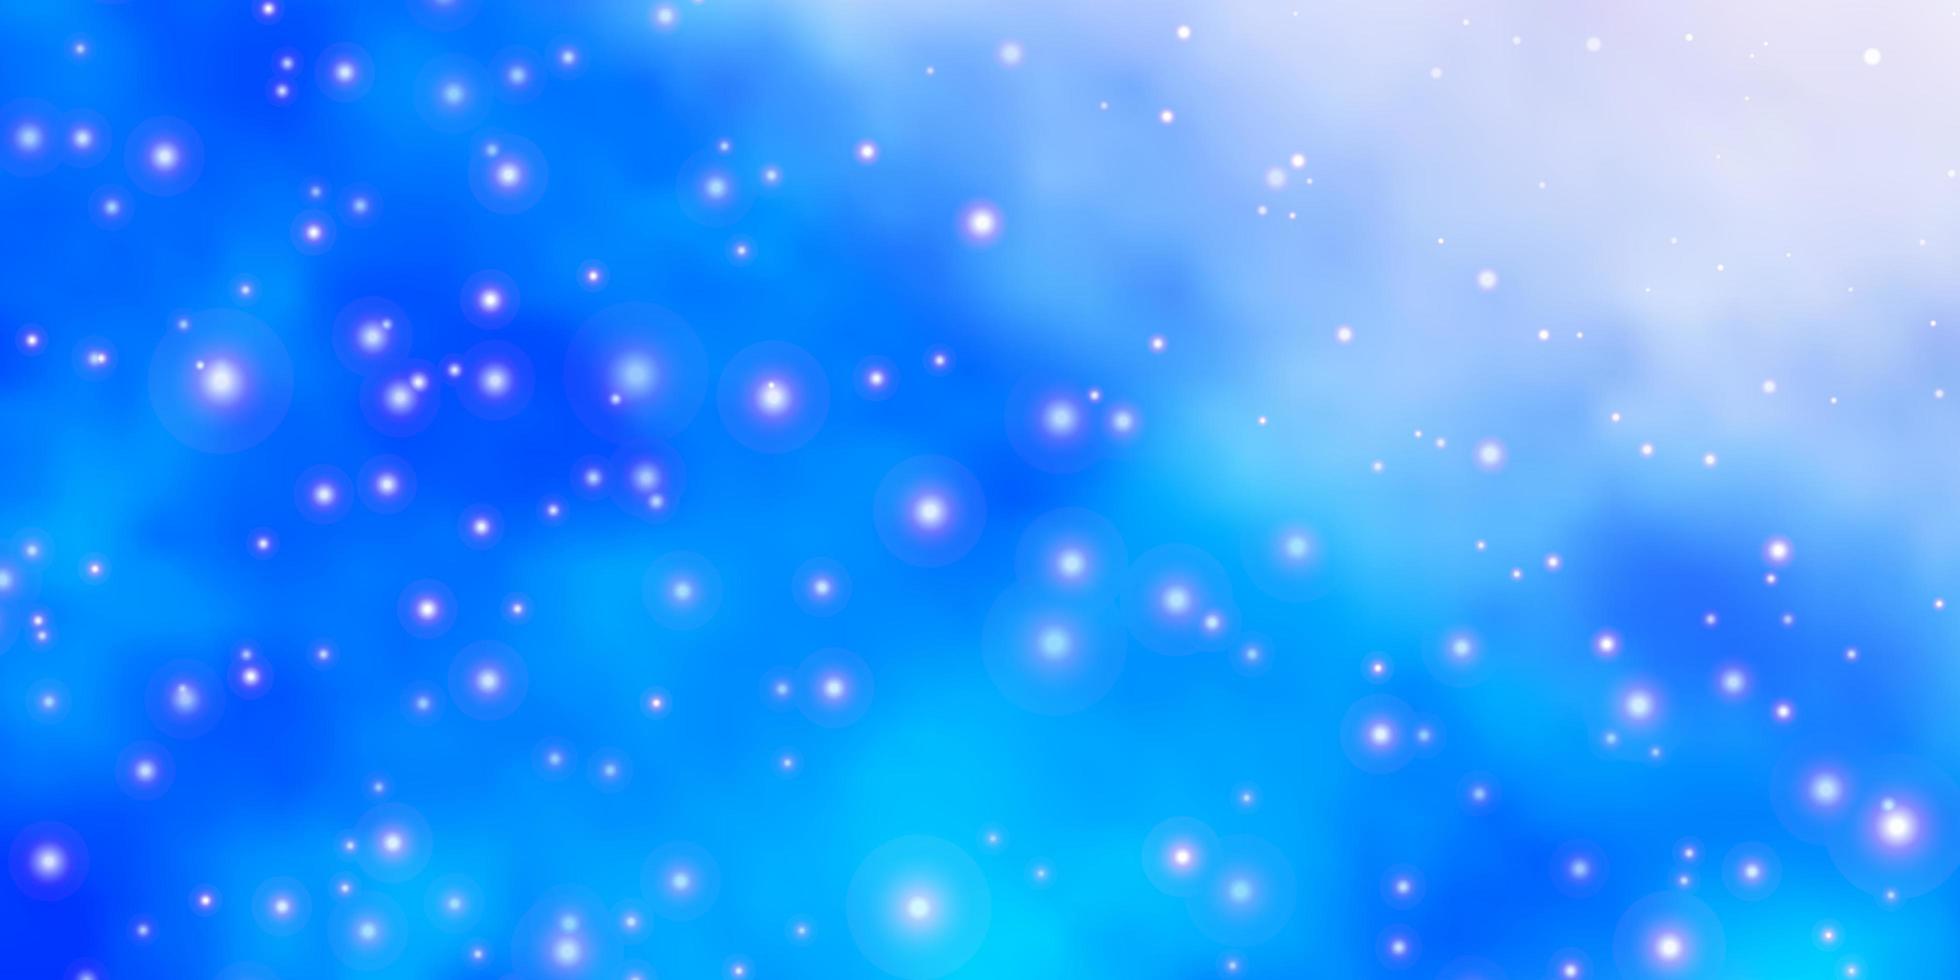 Blue background with colorful stars. vector